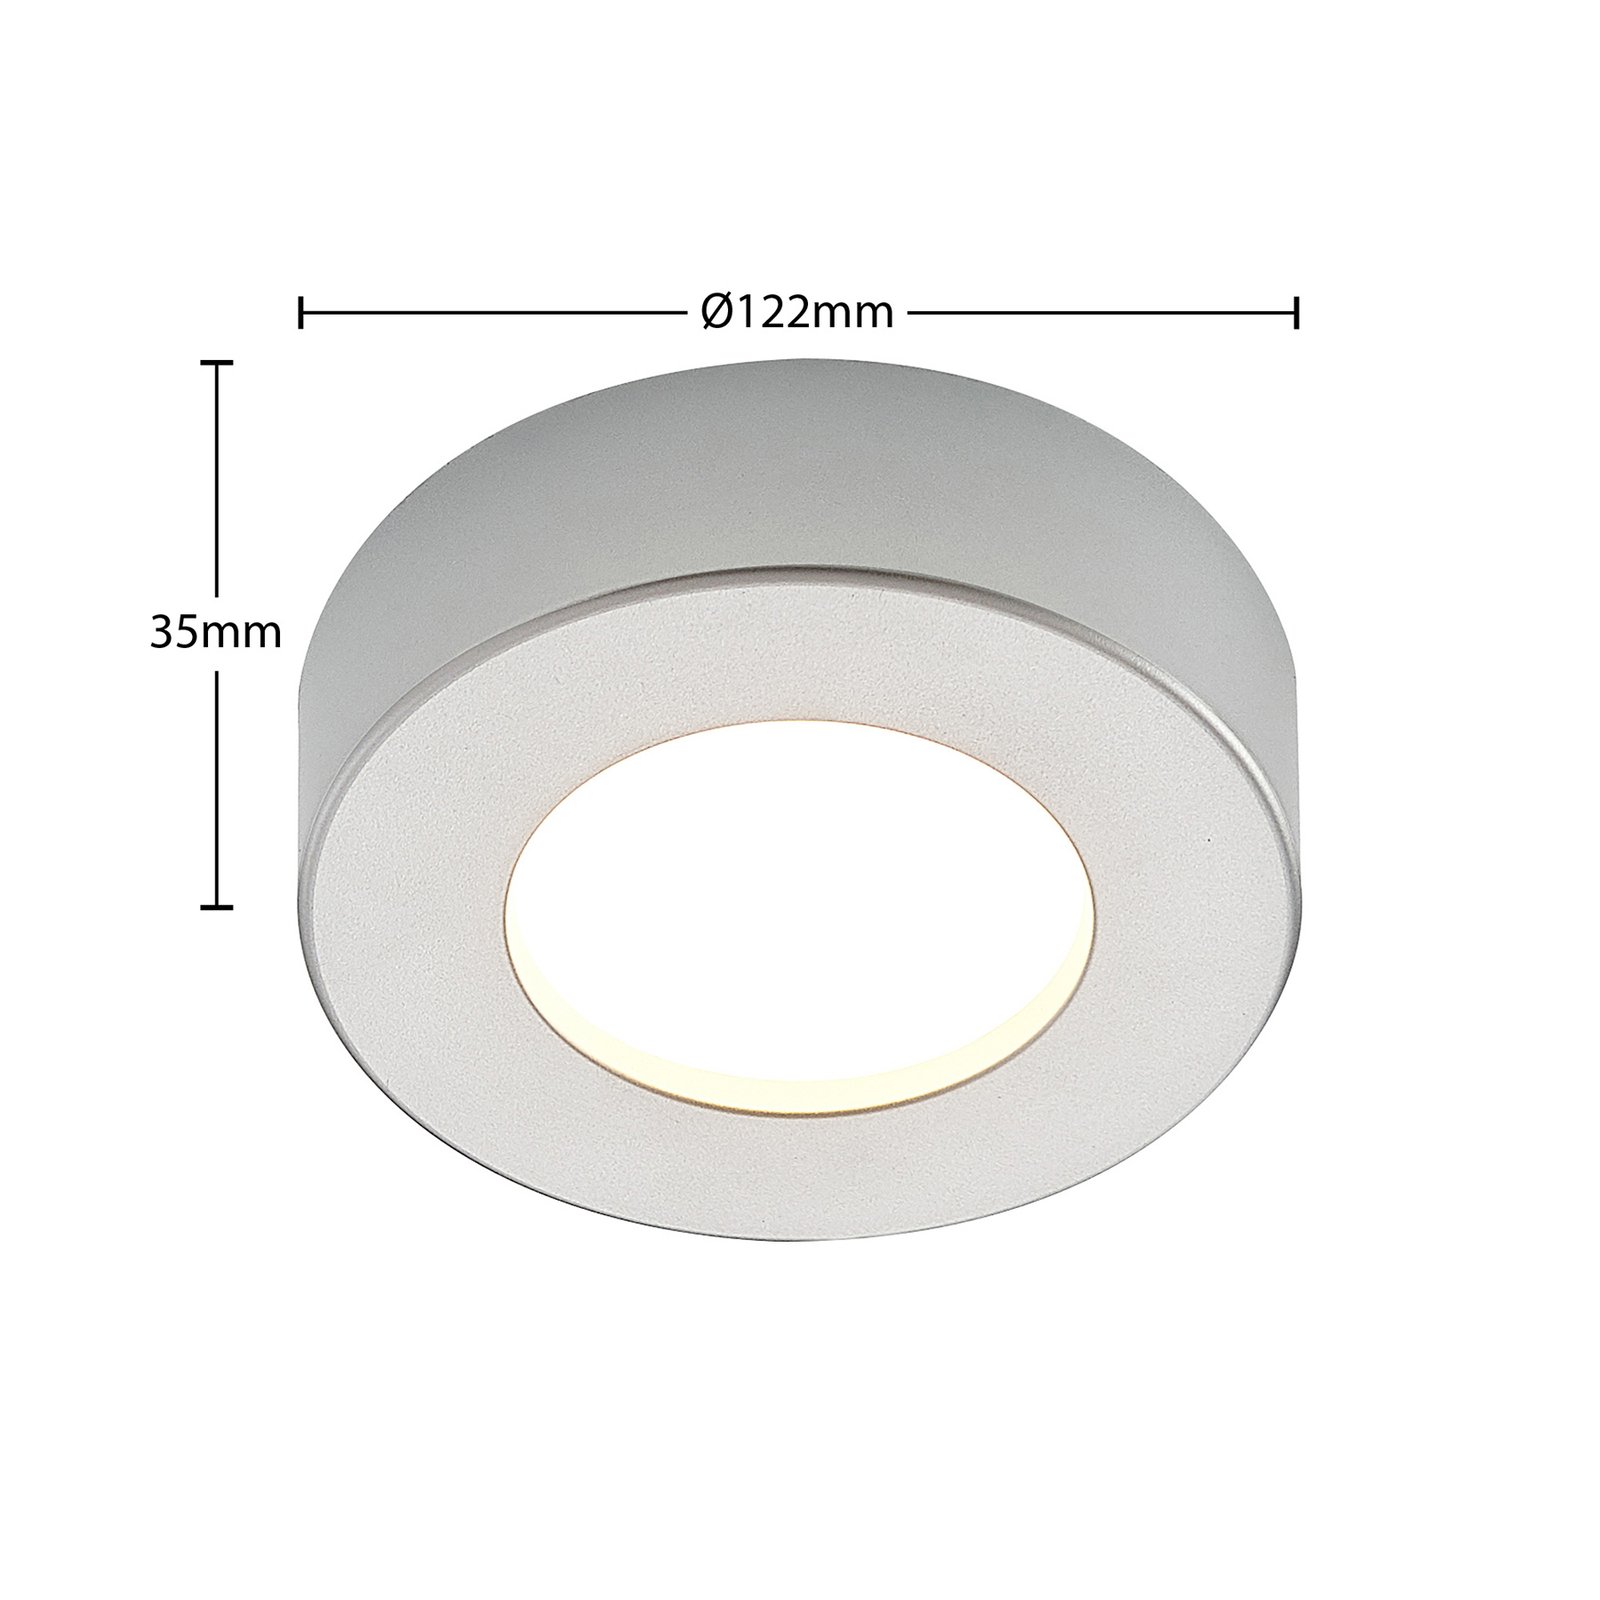 Prios LED ceiling lamp Edwina, silver, 12.2cm, 2pcs, dimmable